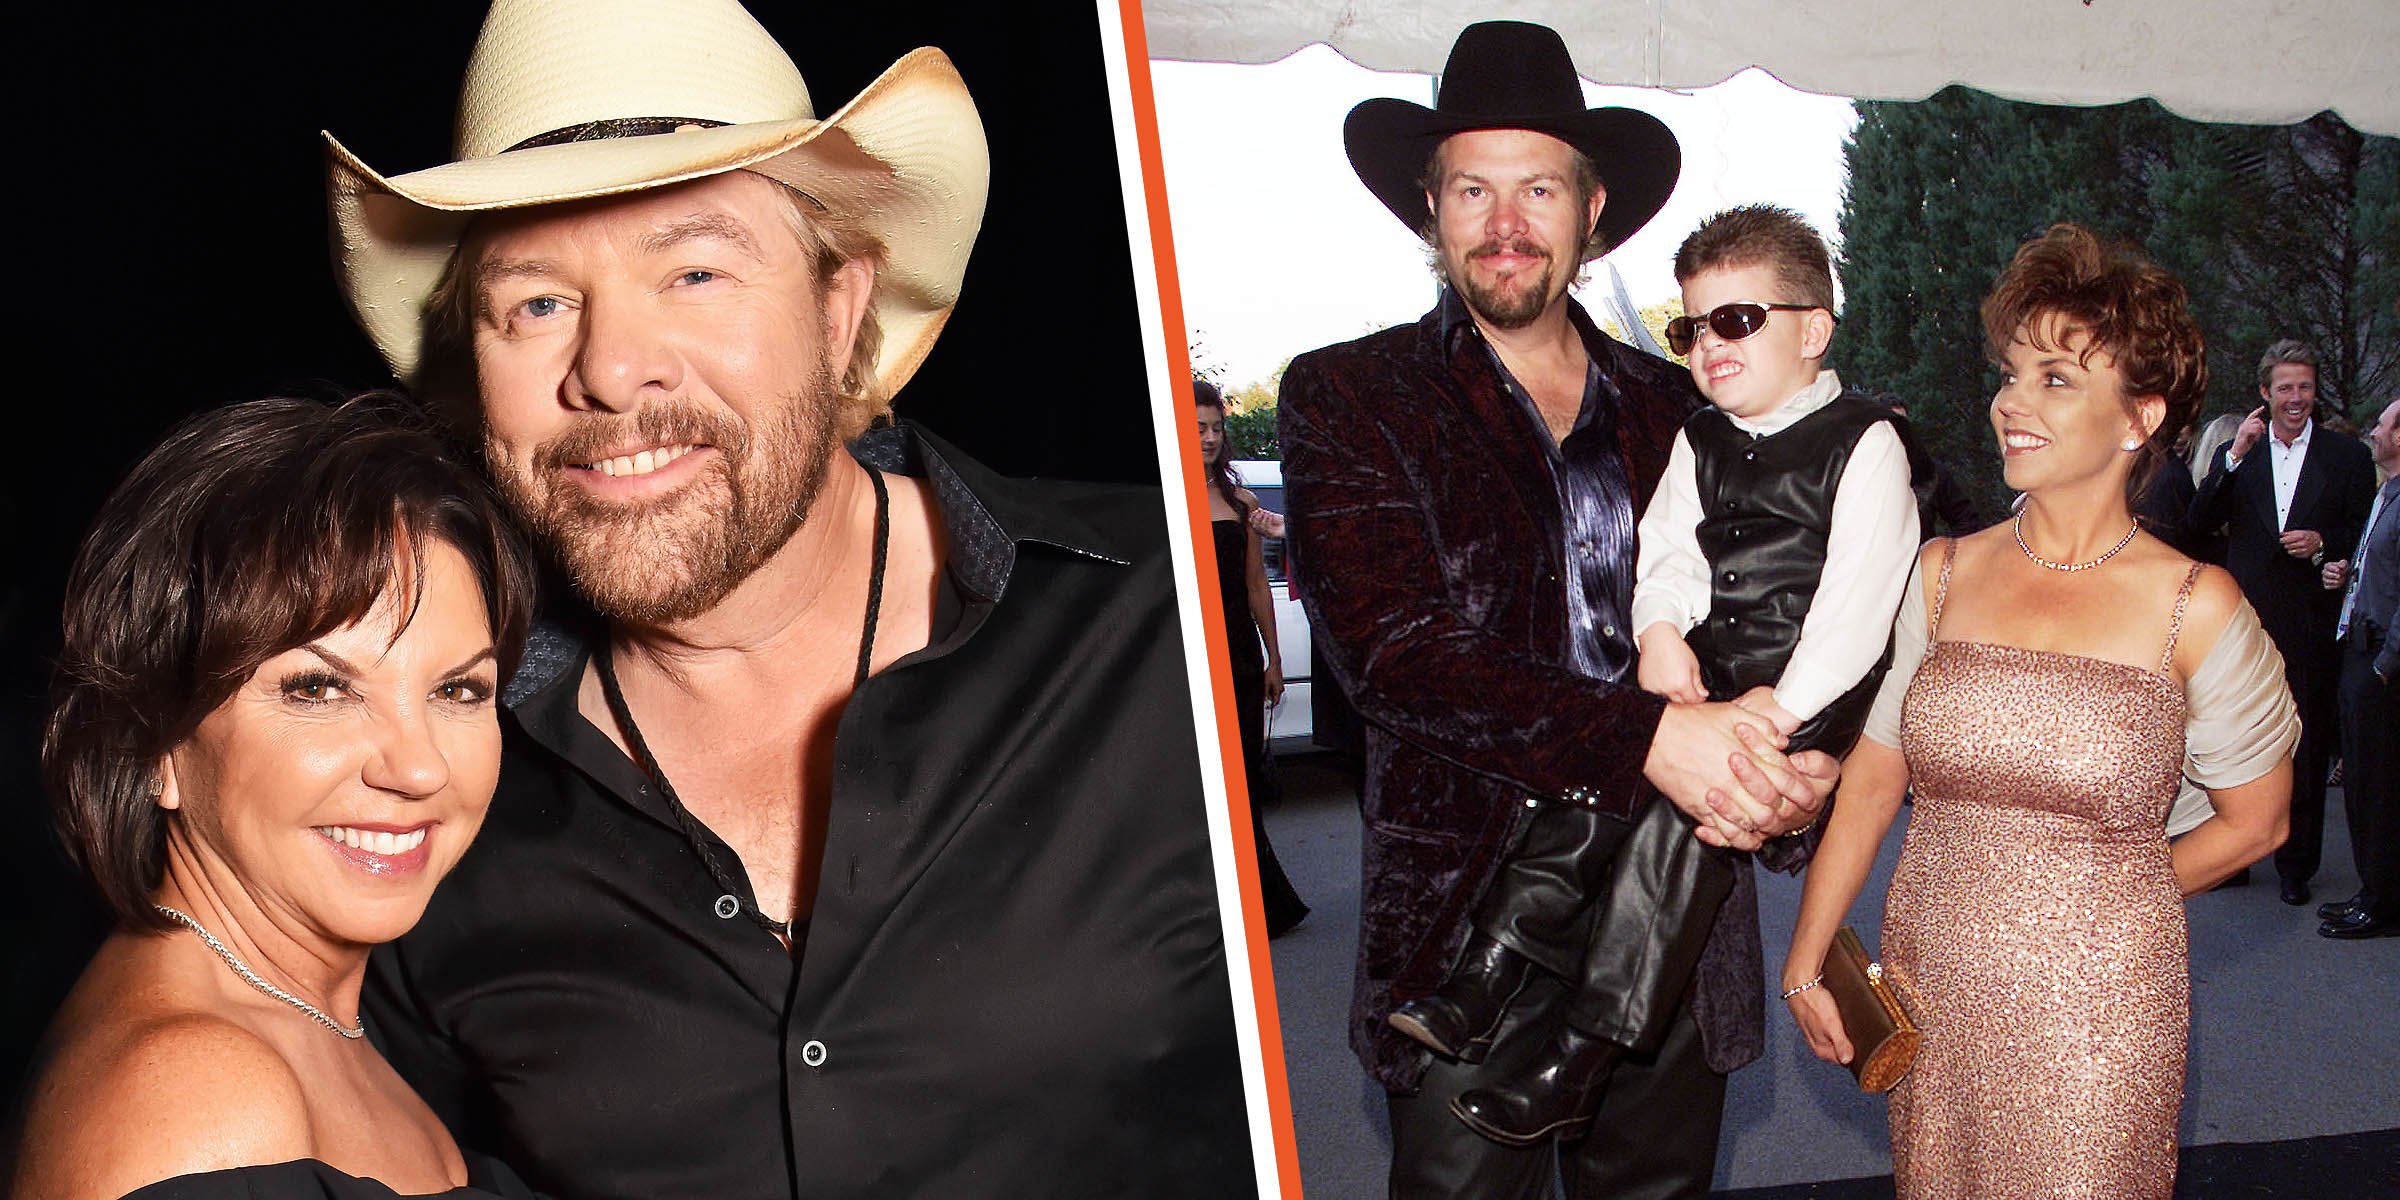 Toby Keith and Tricia Lucus | Toby Keith, Tricia Lucus and Stelen Keith Covel | Source: Getty Images